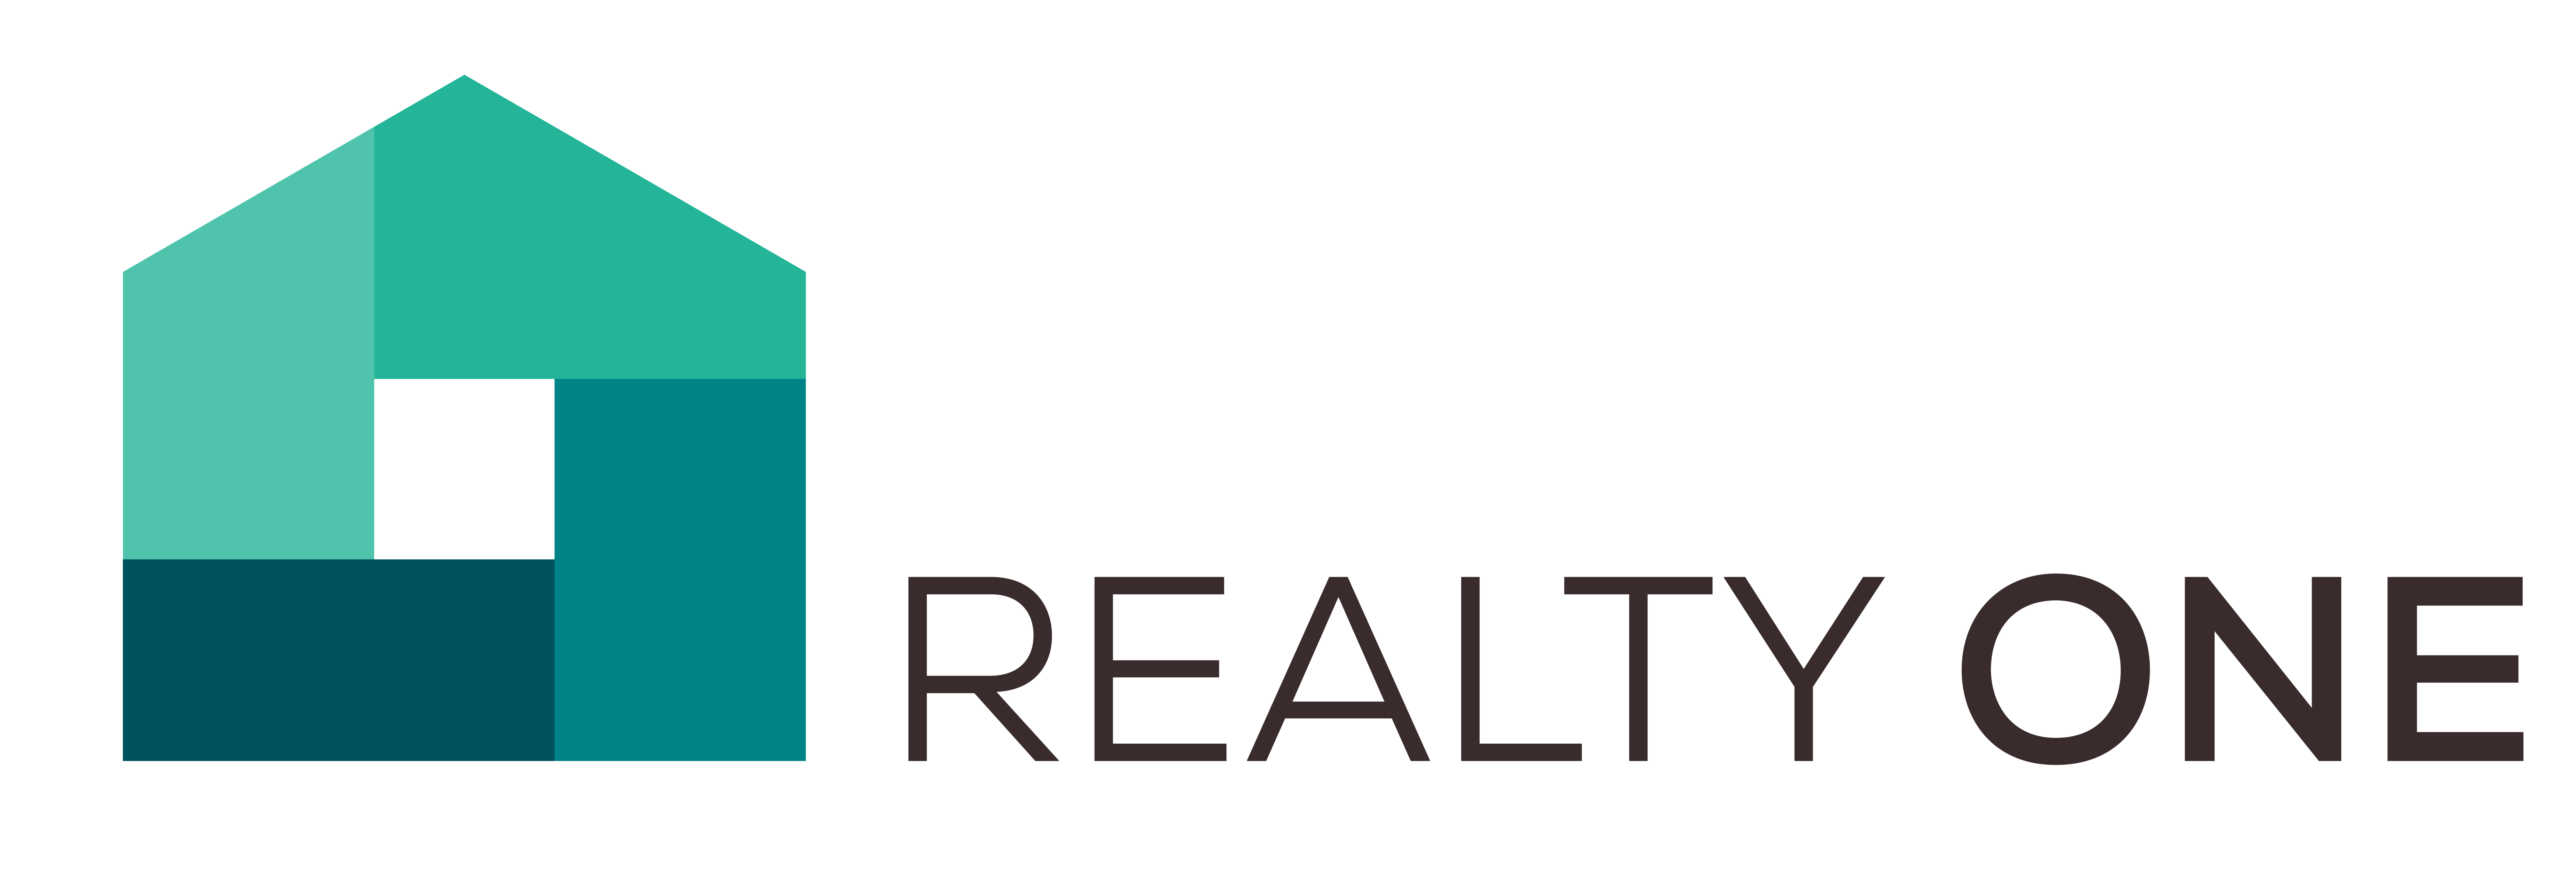 _images/logo-realty.png